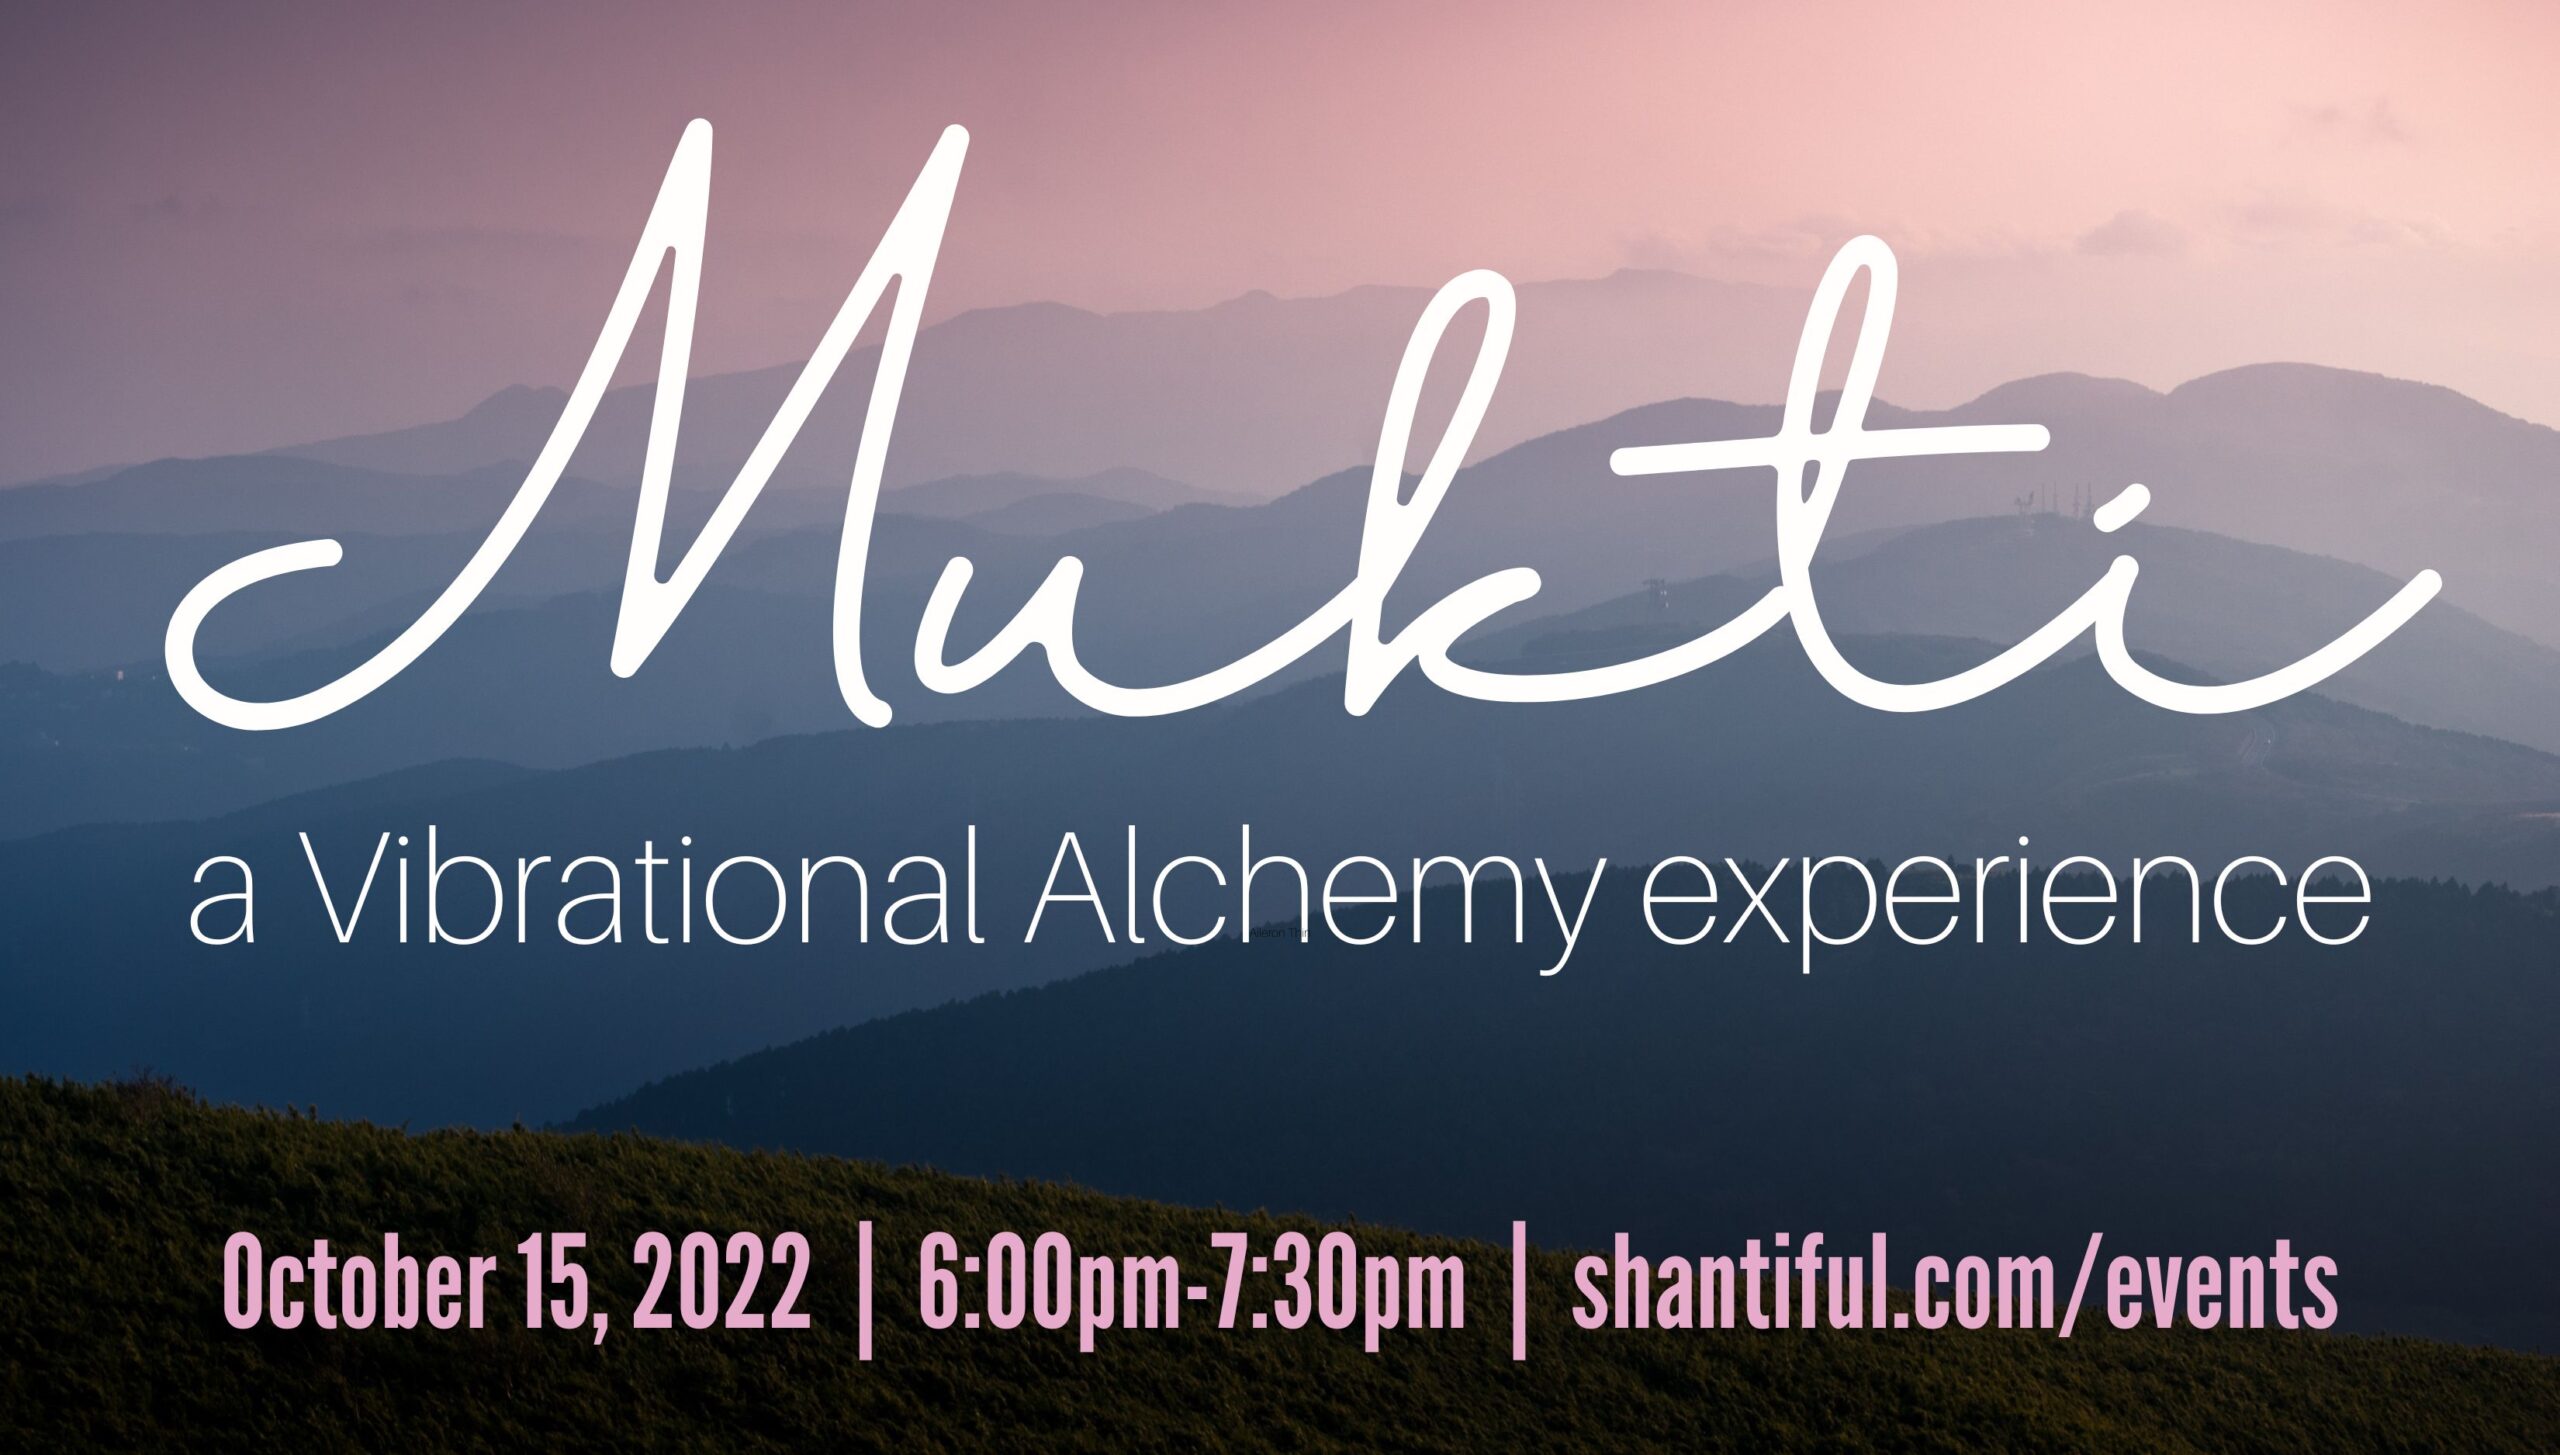 Come enjoy this Vibrational Alchemy experience!